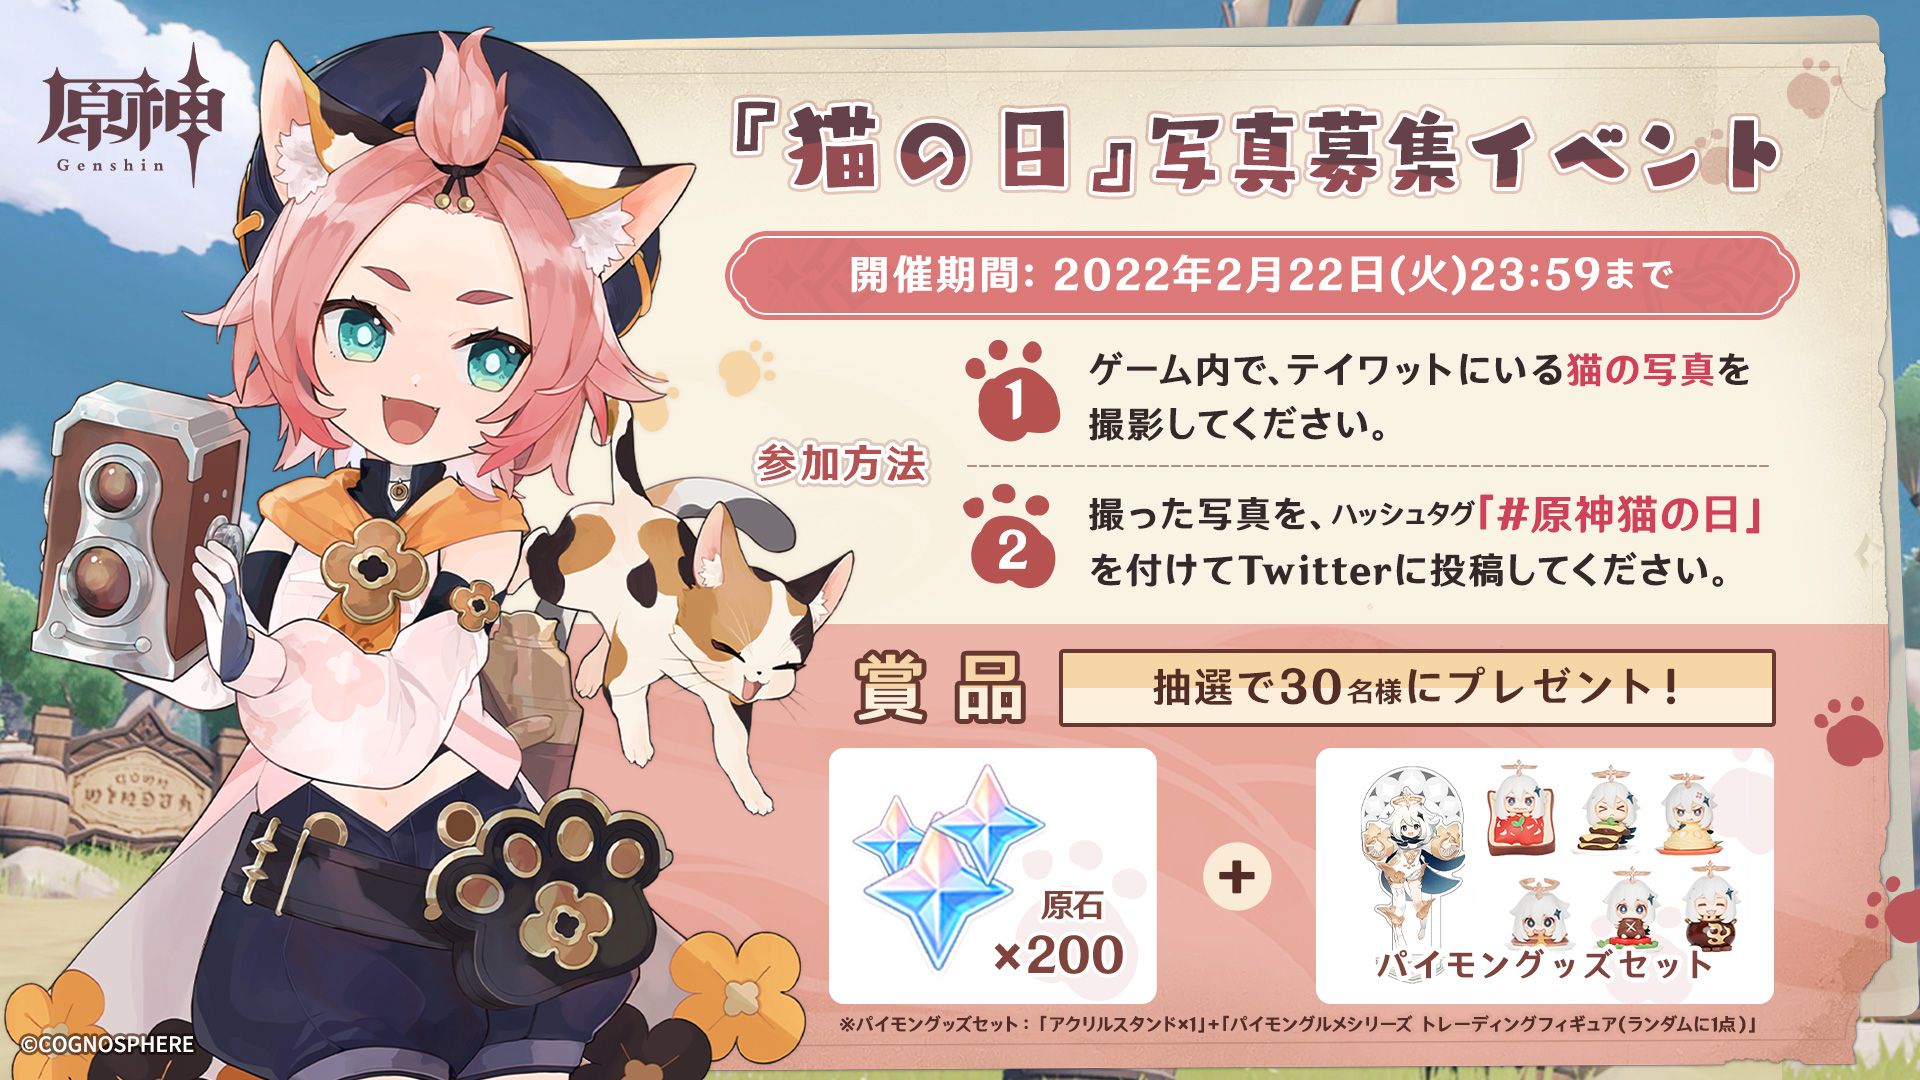 Cat Day Photo Contest in Genshin Impact Explained